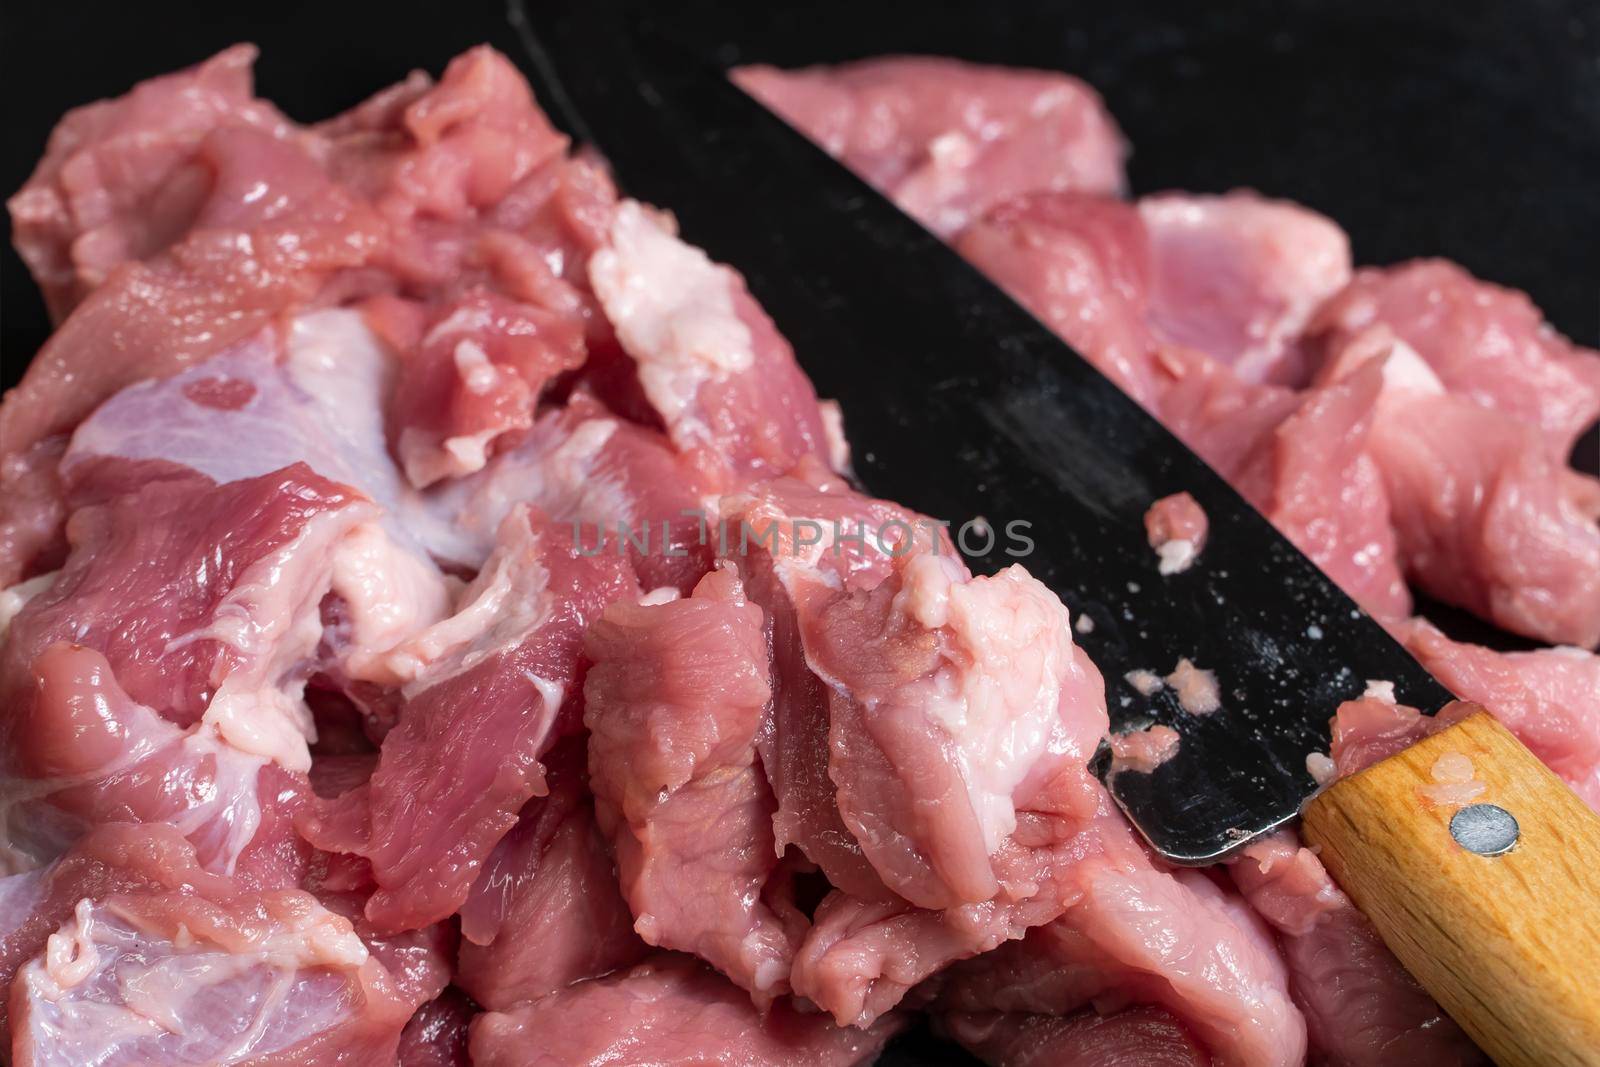 Slice the pork or beef with a knife on the table in close-up. Preparation of meat dishes and food products. Pieces of red meat for shish kebab, barbecue or kebab. Raw fresh meat is cut with a knife